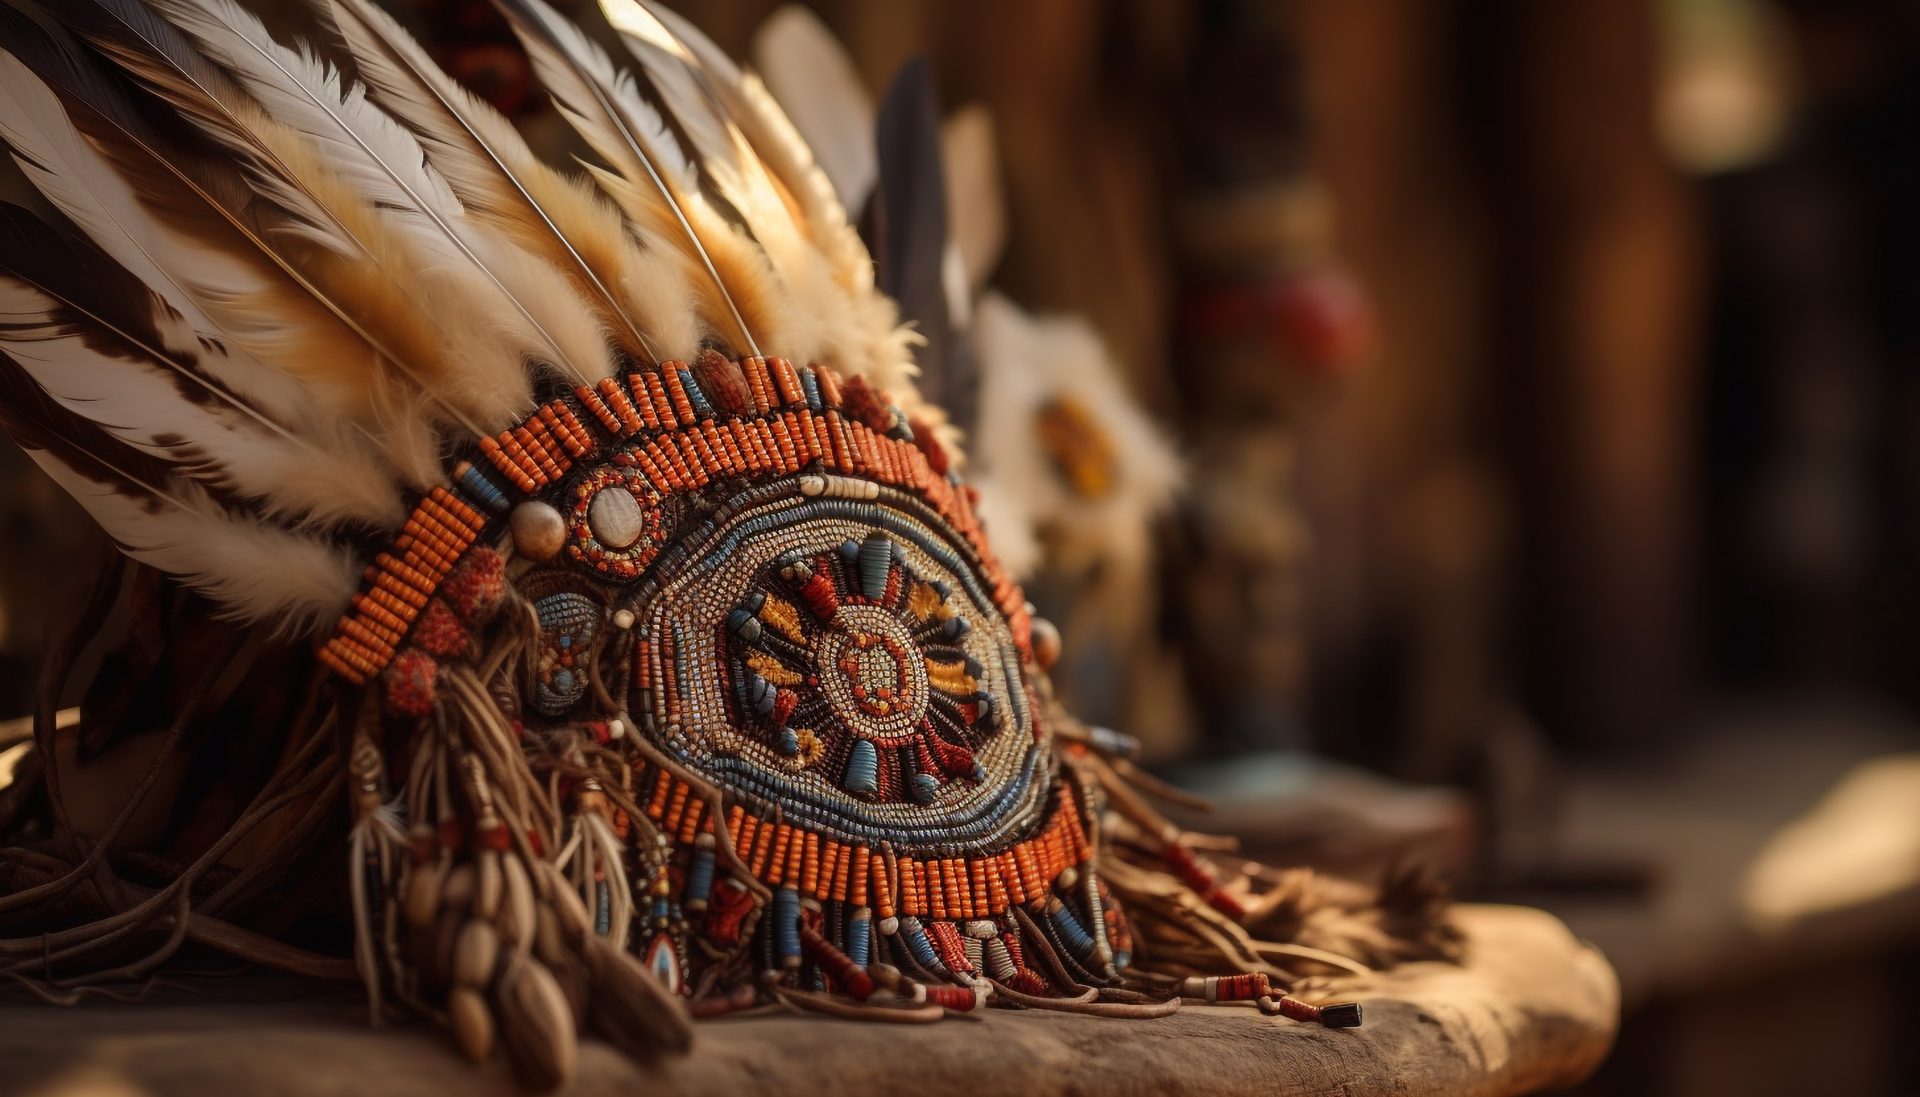 Read Top Destinations to Explore Native American Heritage Roots in the US 